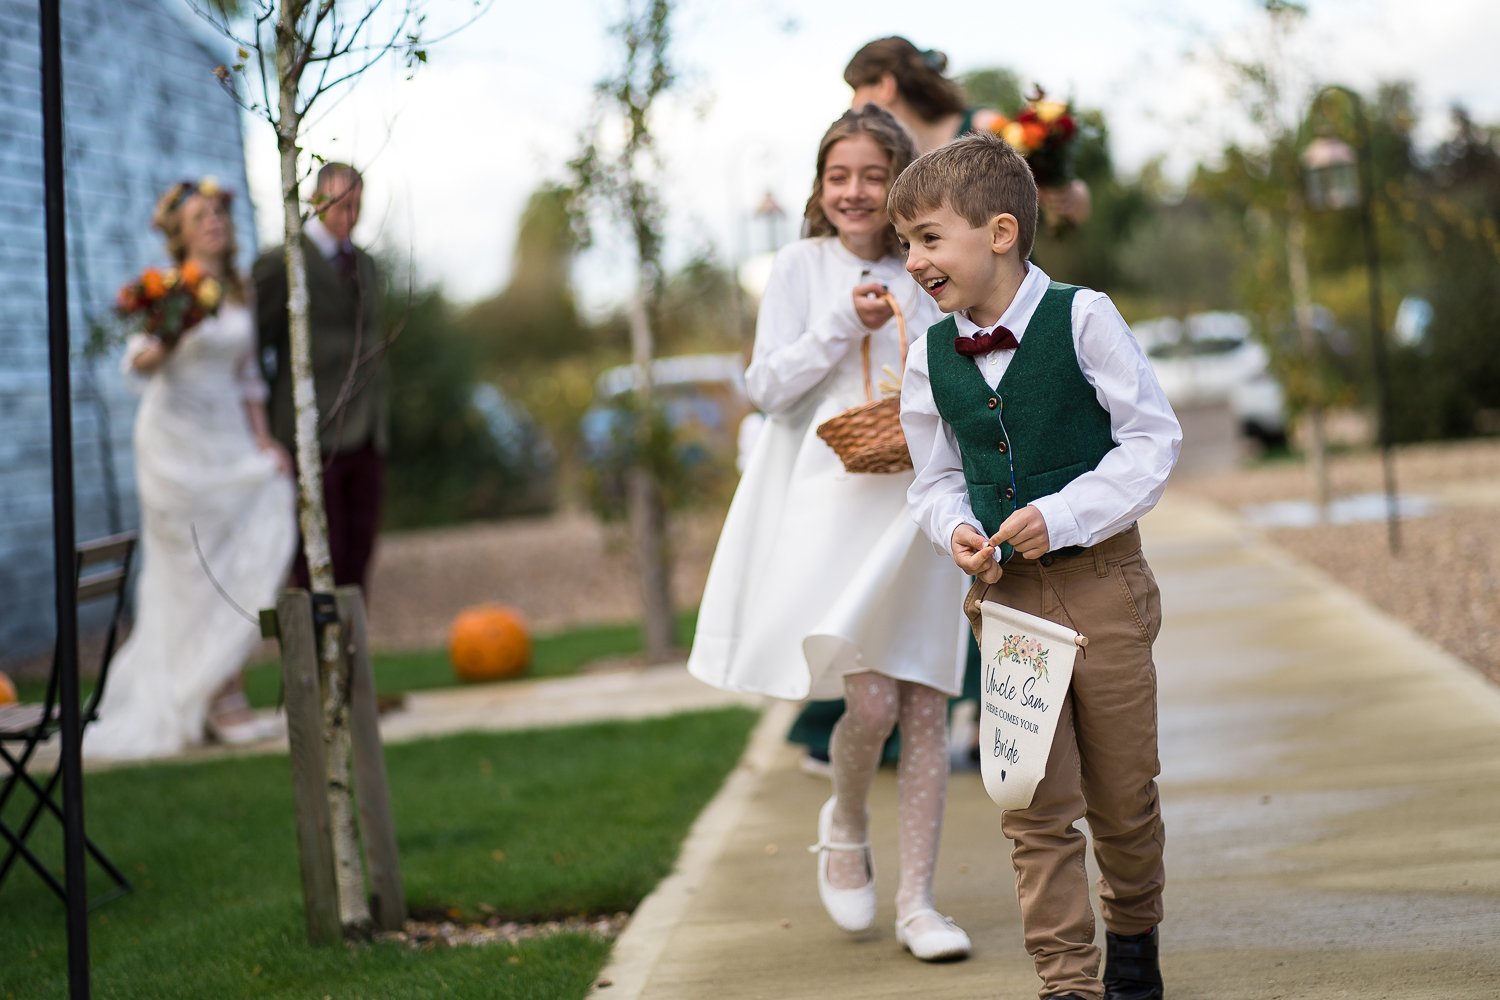 Page boy and flower girl make a happy entrance